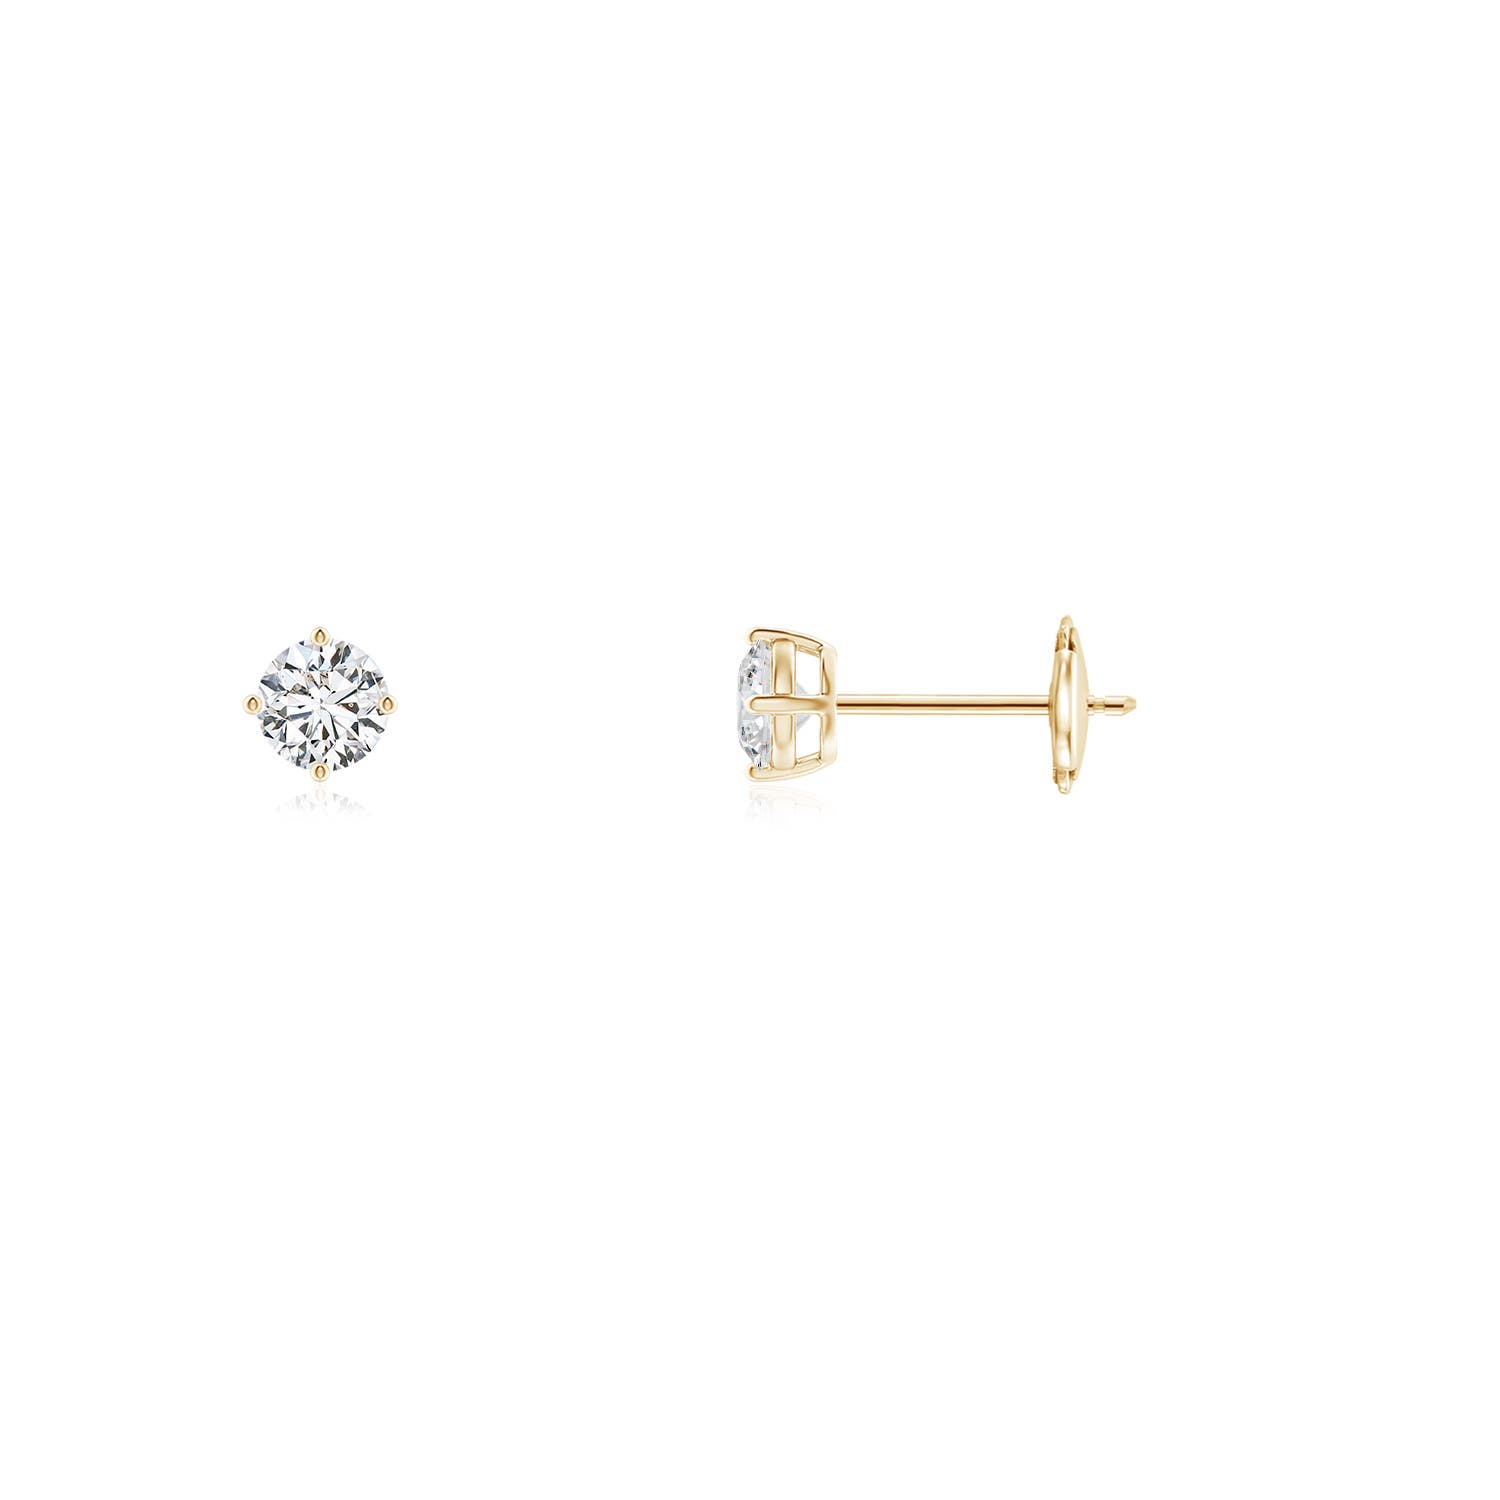 HSI2 / 0.21 CT / 14 KT Yellow Gold